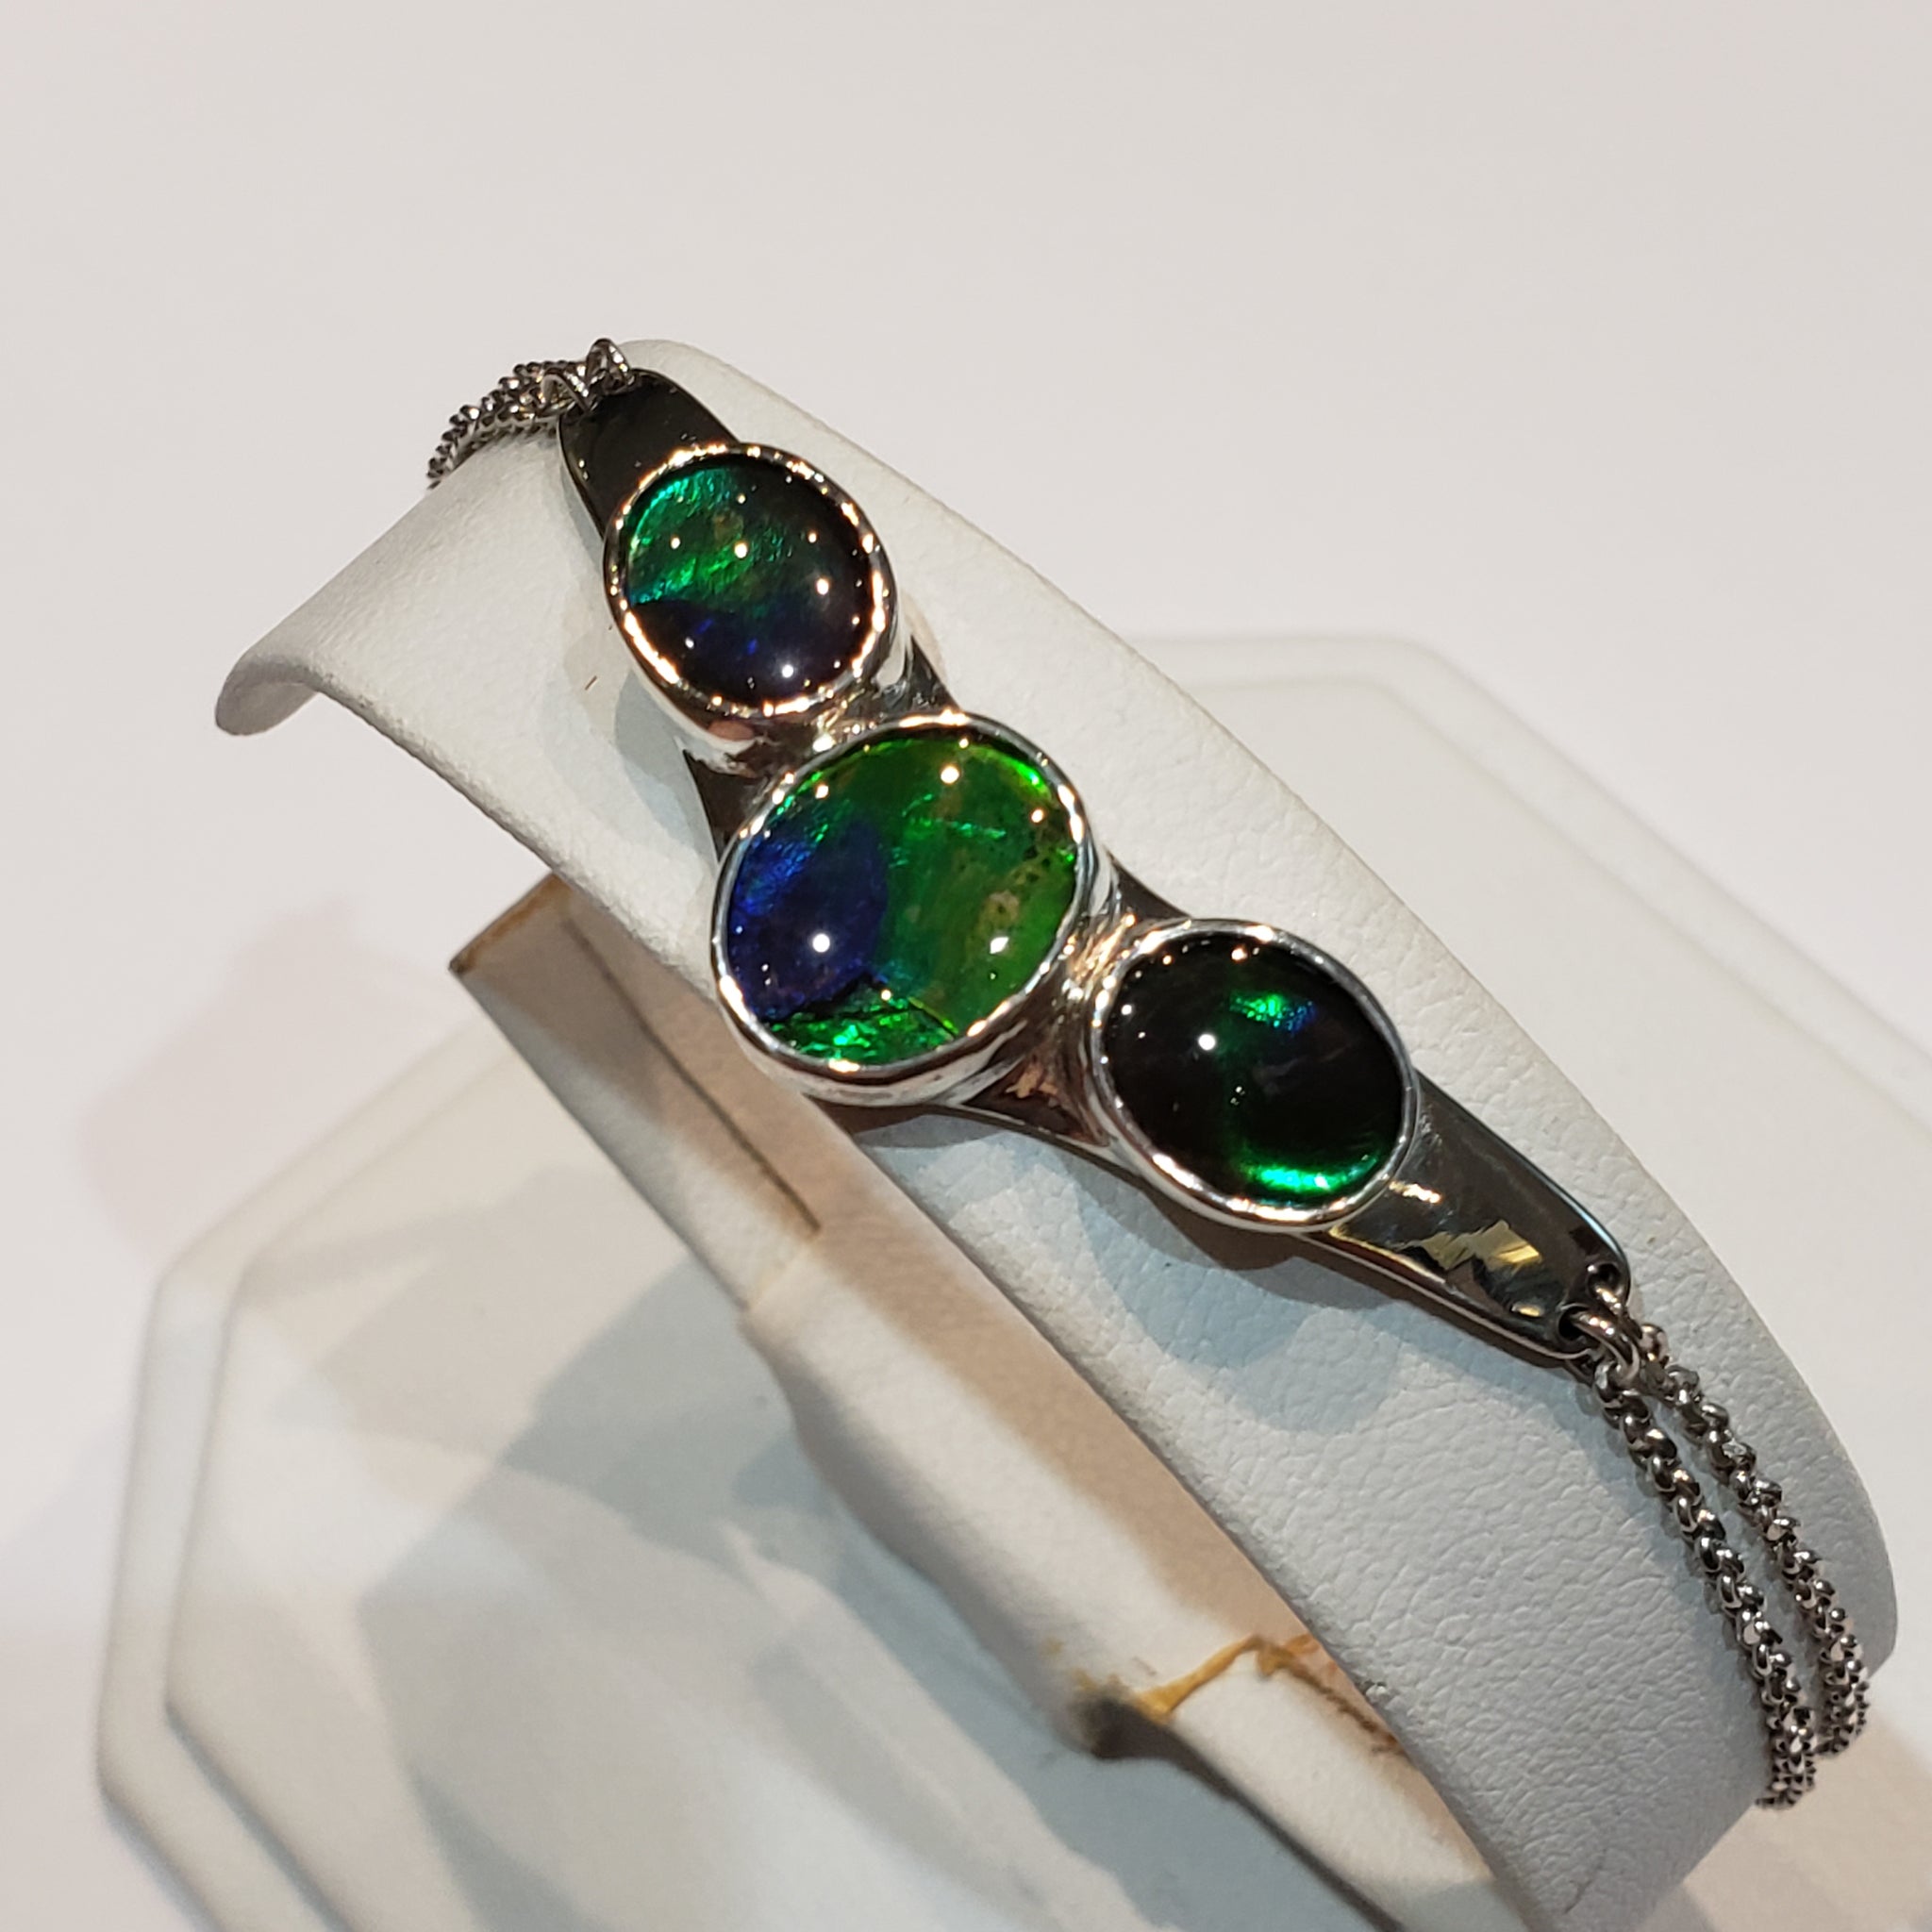 Ammolite Silver Bracelet with Three Blue and Green Gemstones PN: E21072 %product from Empire Ammolite